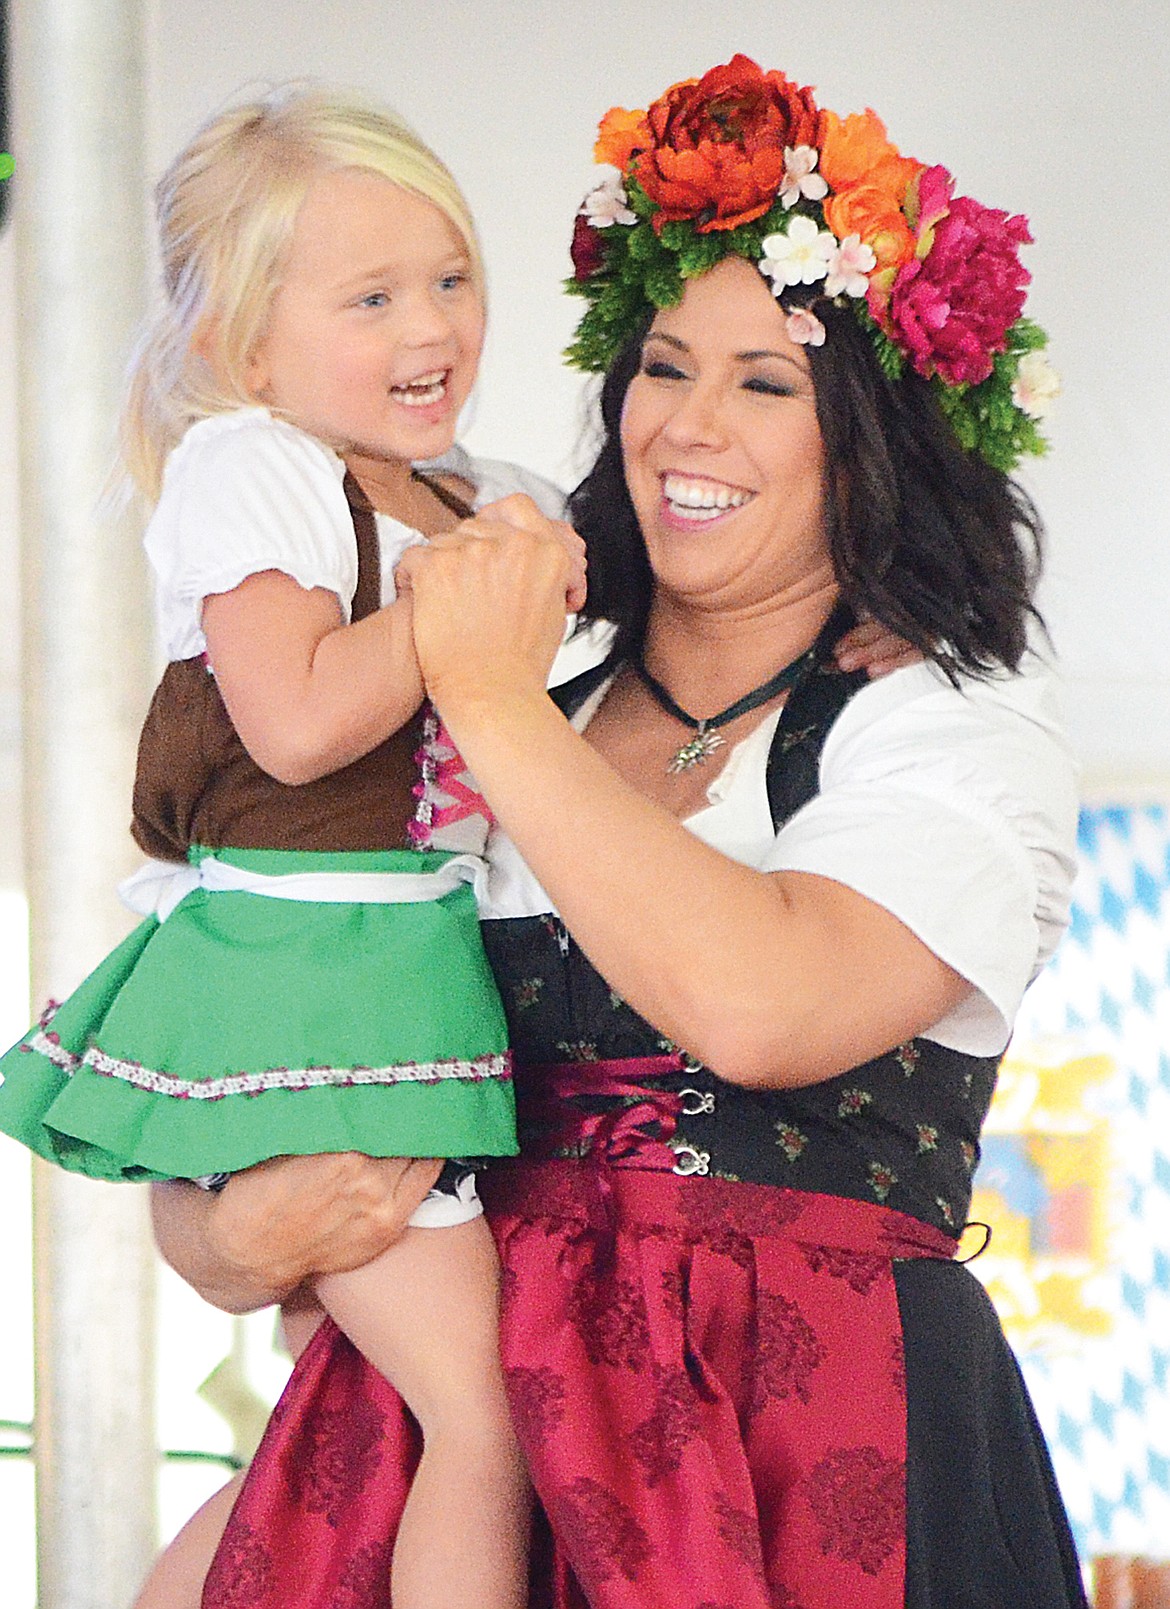 Shauna Dunn dances with Grace Dunn at the Great Northwest Oktoberfest celebration on Saturday in Whitefish.